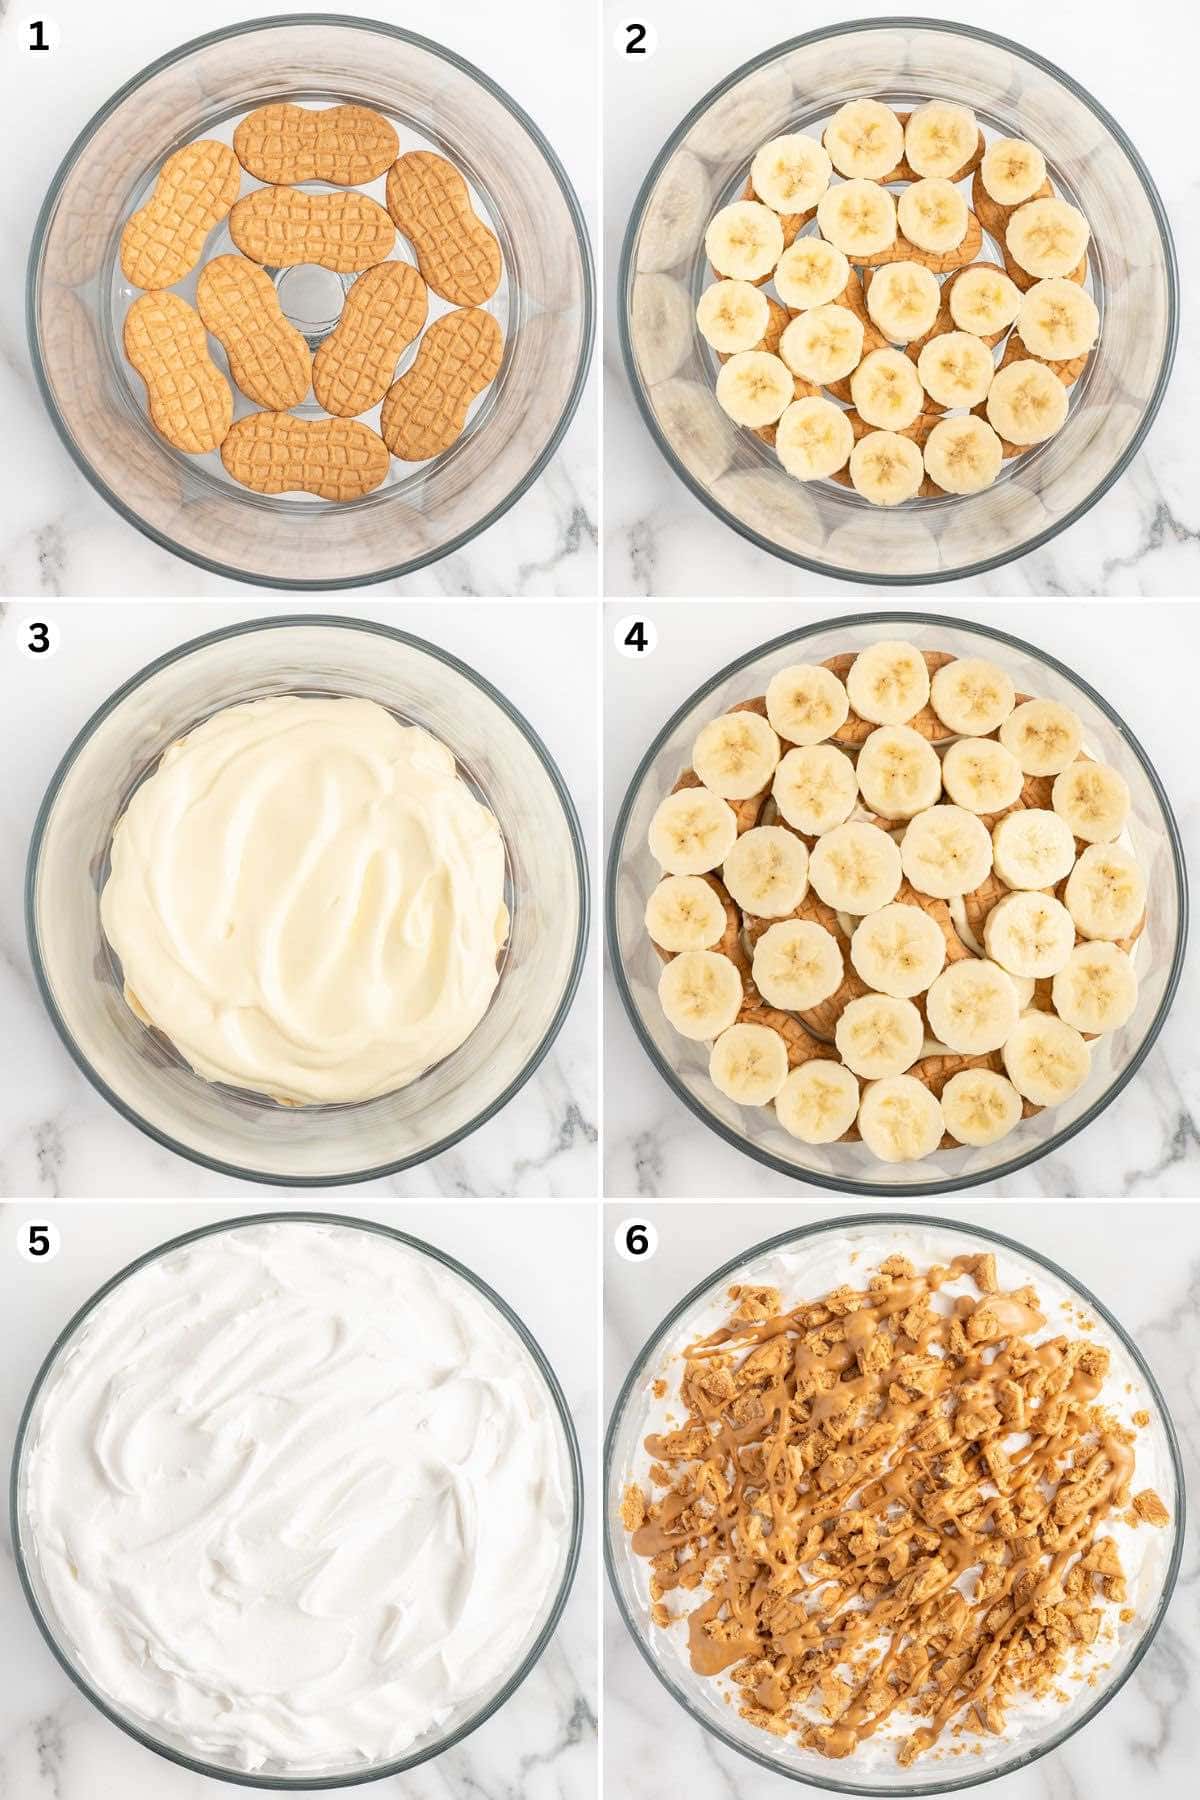 place the nutter butter at the bottom of the trifle bowl. top with banana slices. top with pudding mixture and repeat. add whipped cream and crushed nutter butter on top.